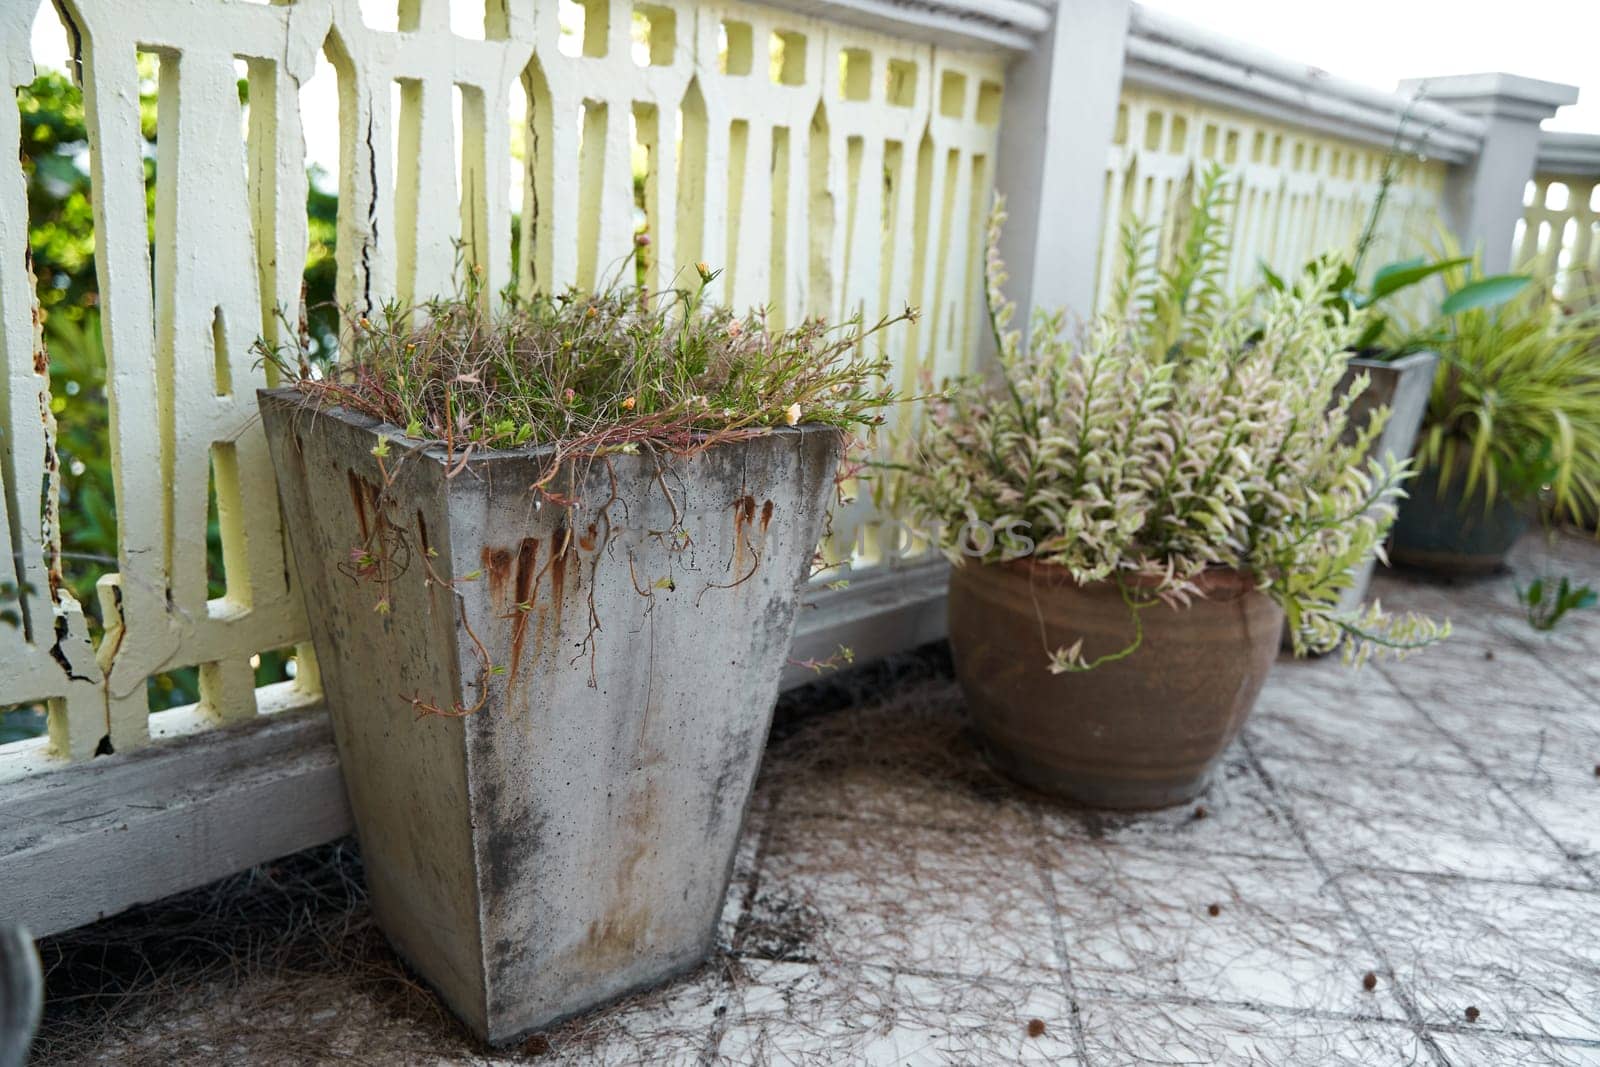 Unmaintained concrete pots with plants on the outdoor terrace.